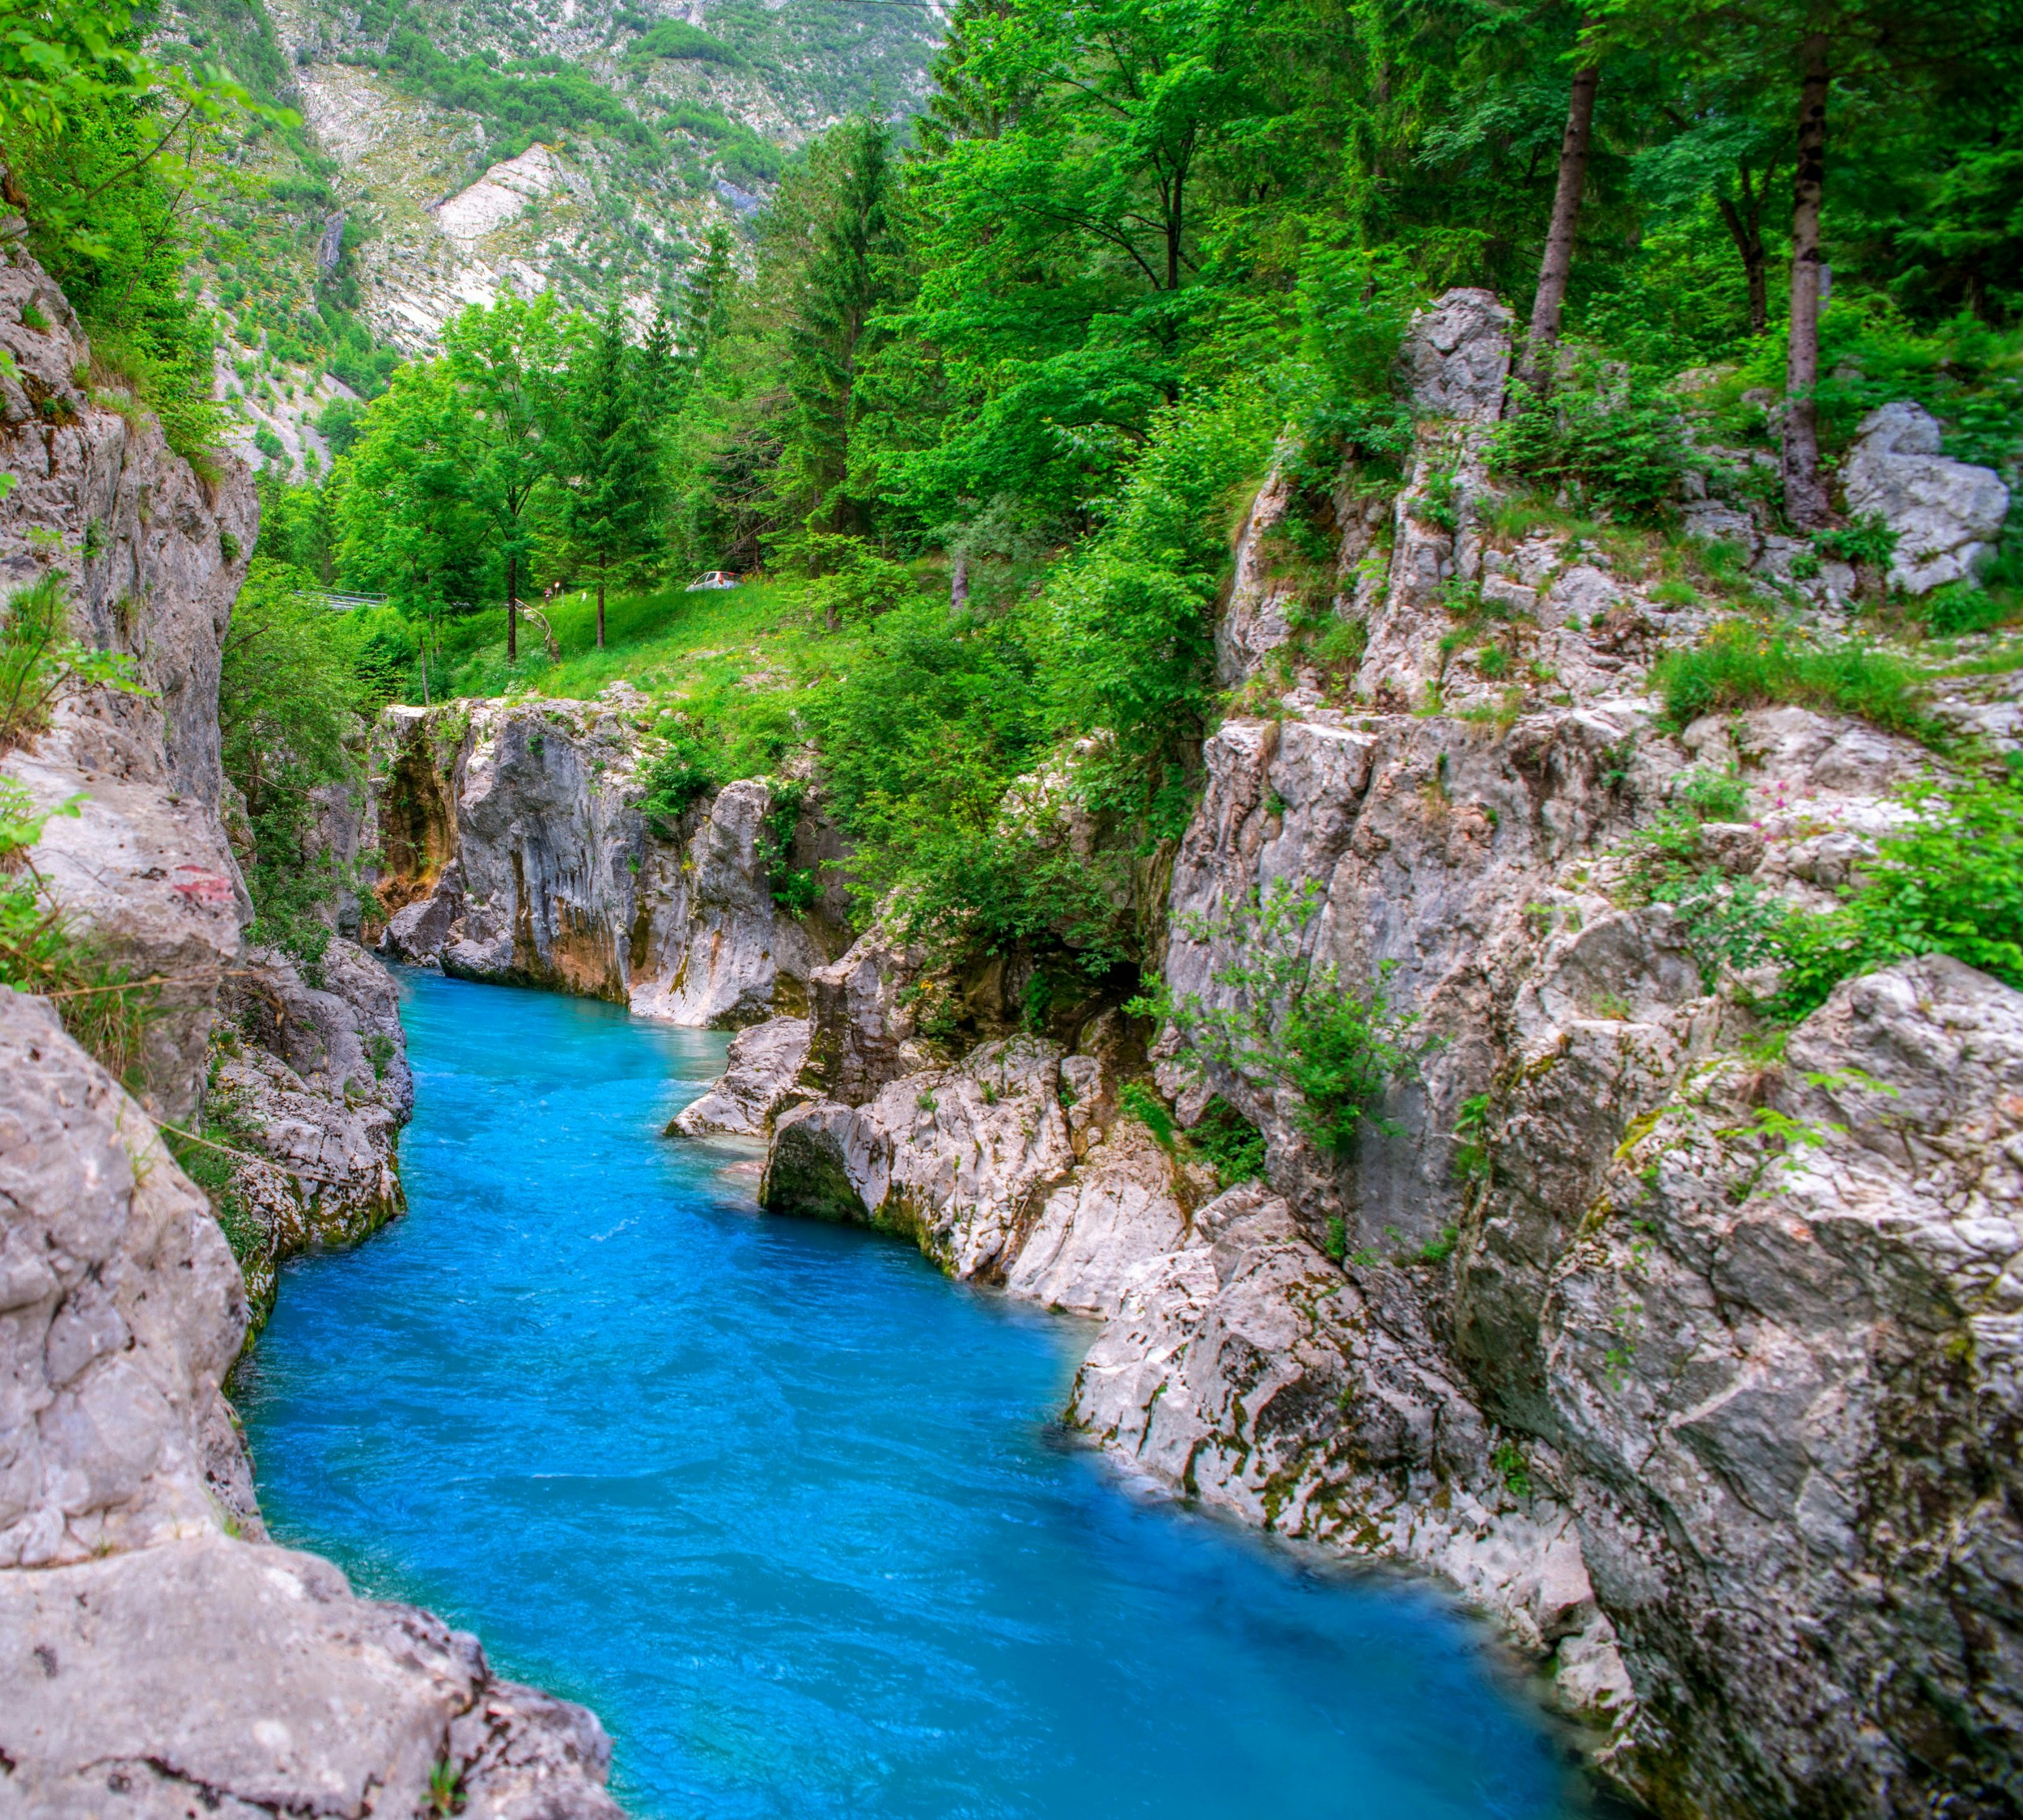 A bright blue pool within a river that is flowing between rocky cliffs topped with bright green evergreen trees.